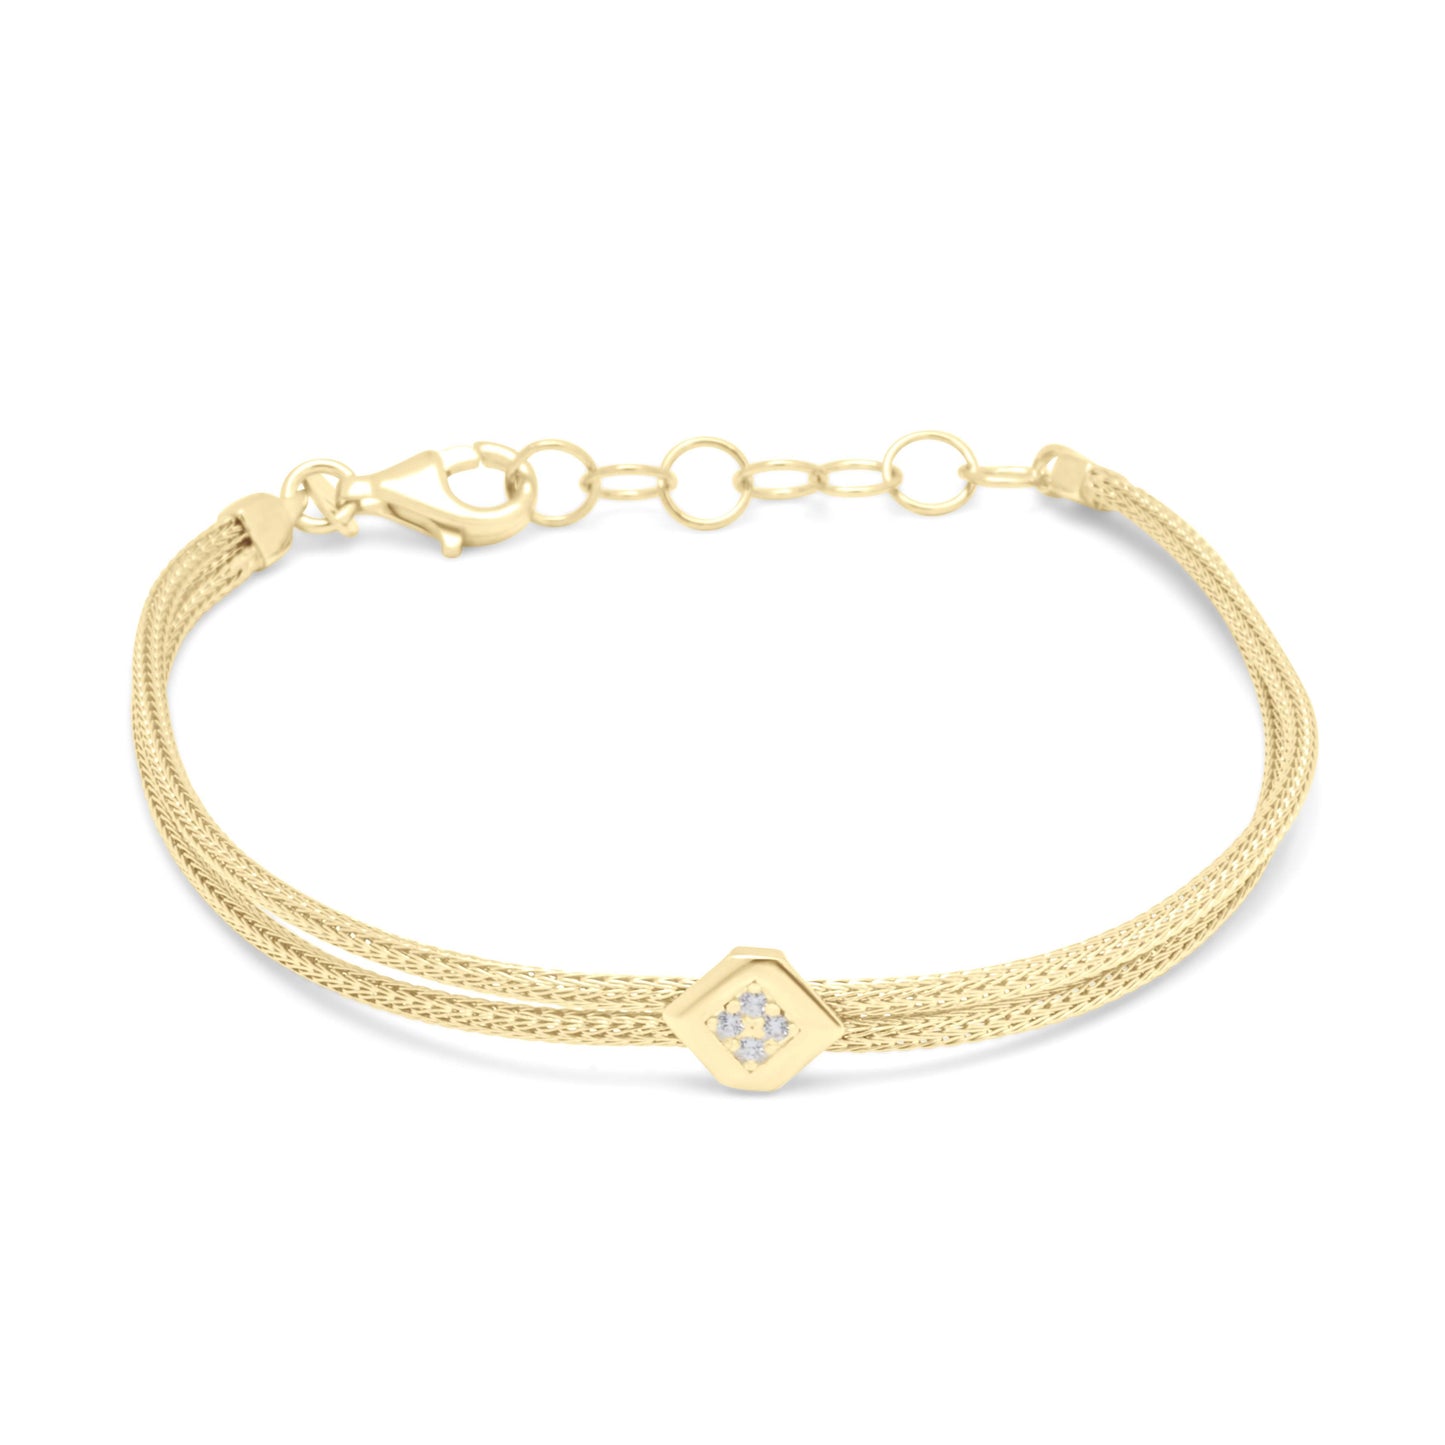 Naveta Bracelet with Stones - Gold Plated